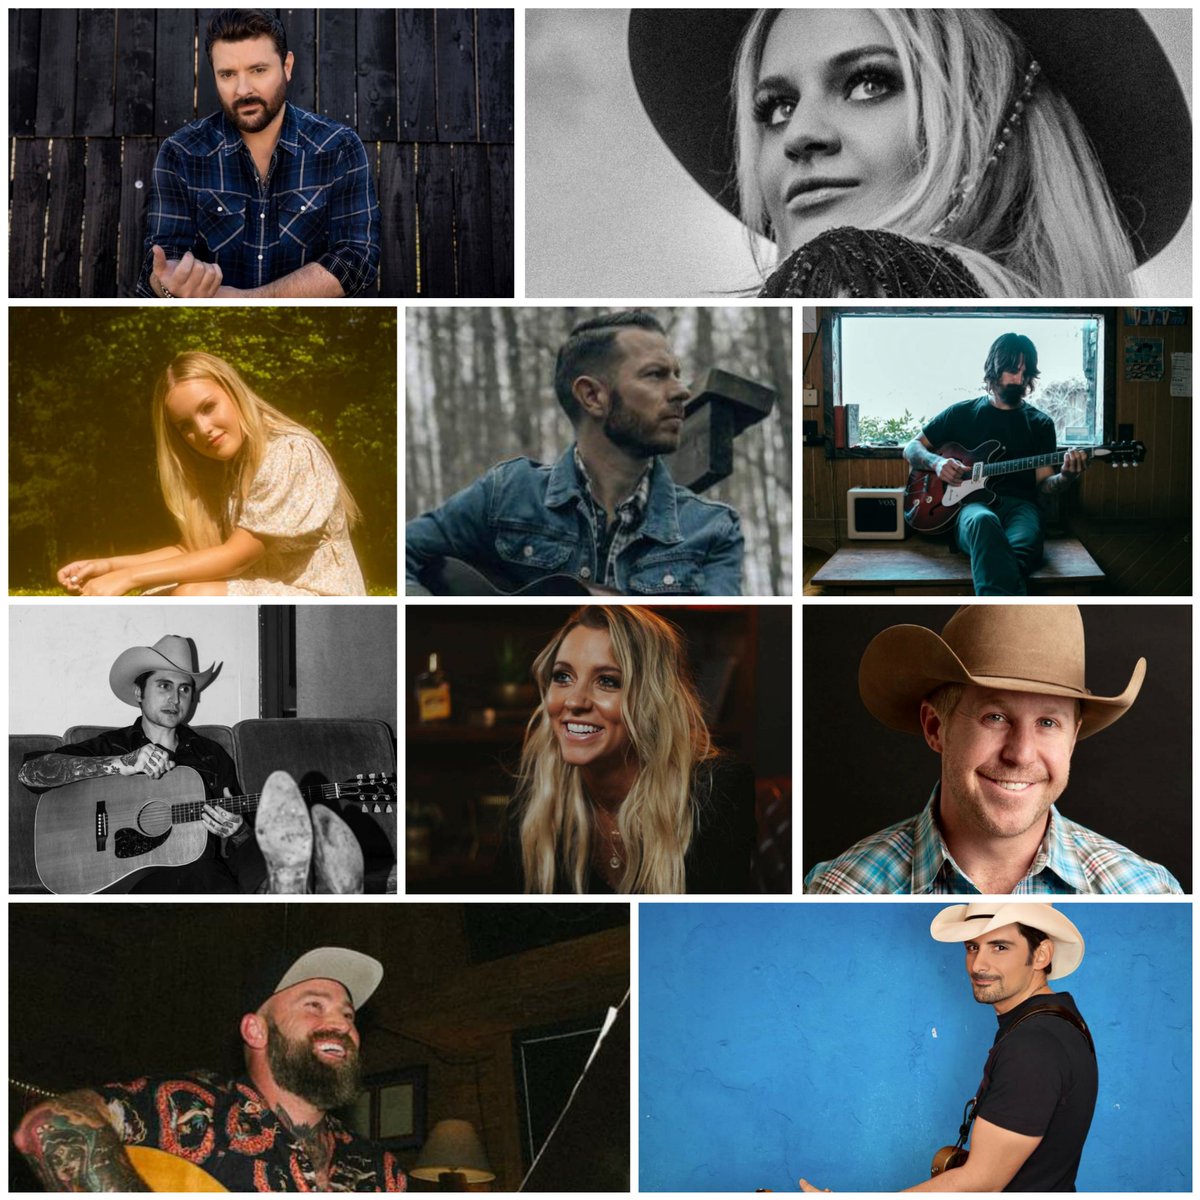 It's been another great week for new country music, with some great new tracks from Zac Brown Band, Chris Young, Brad Paisley and more!

Check out our picks here: https://t.co/5M5A59ZoXH https://t.co/5yYBq48yXI